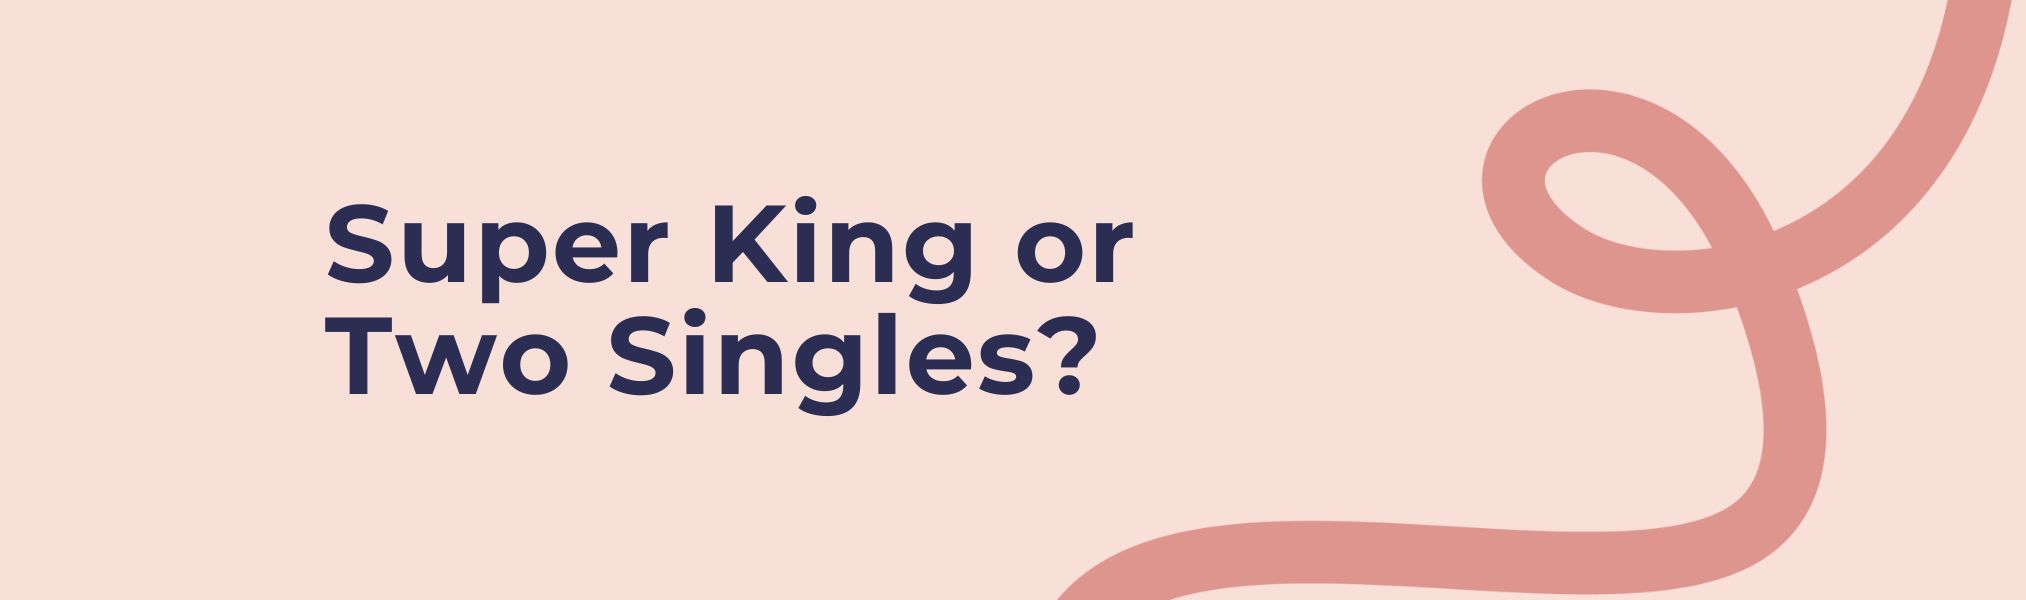 Super King Size Bed Vs King Size Bed: What Is The Difference